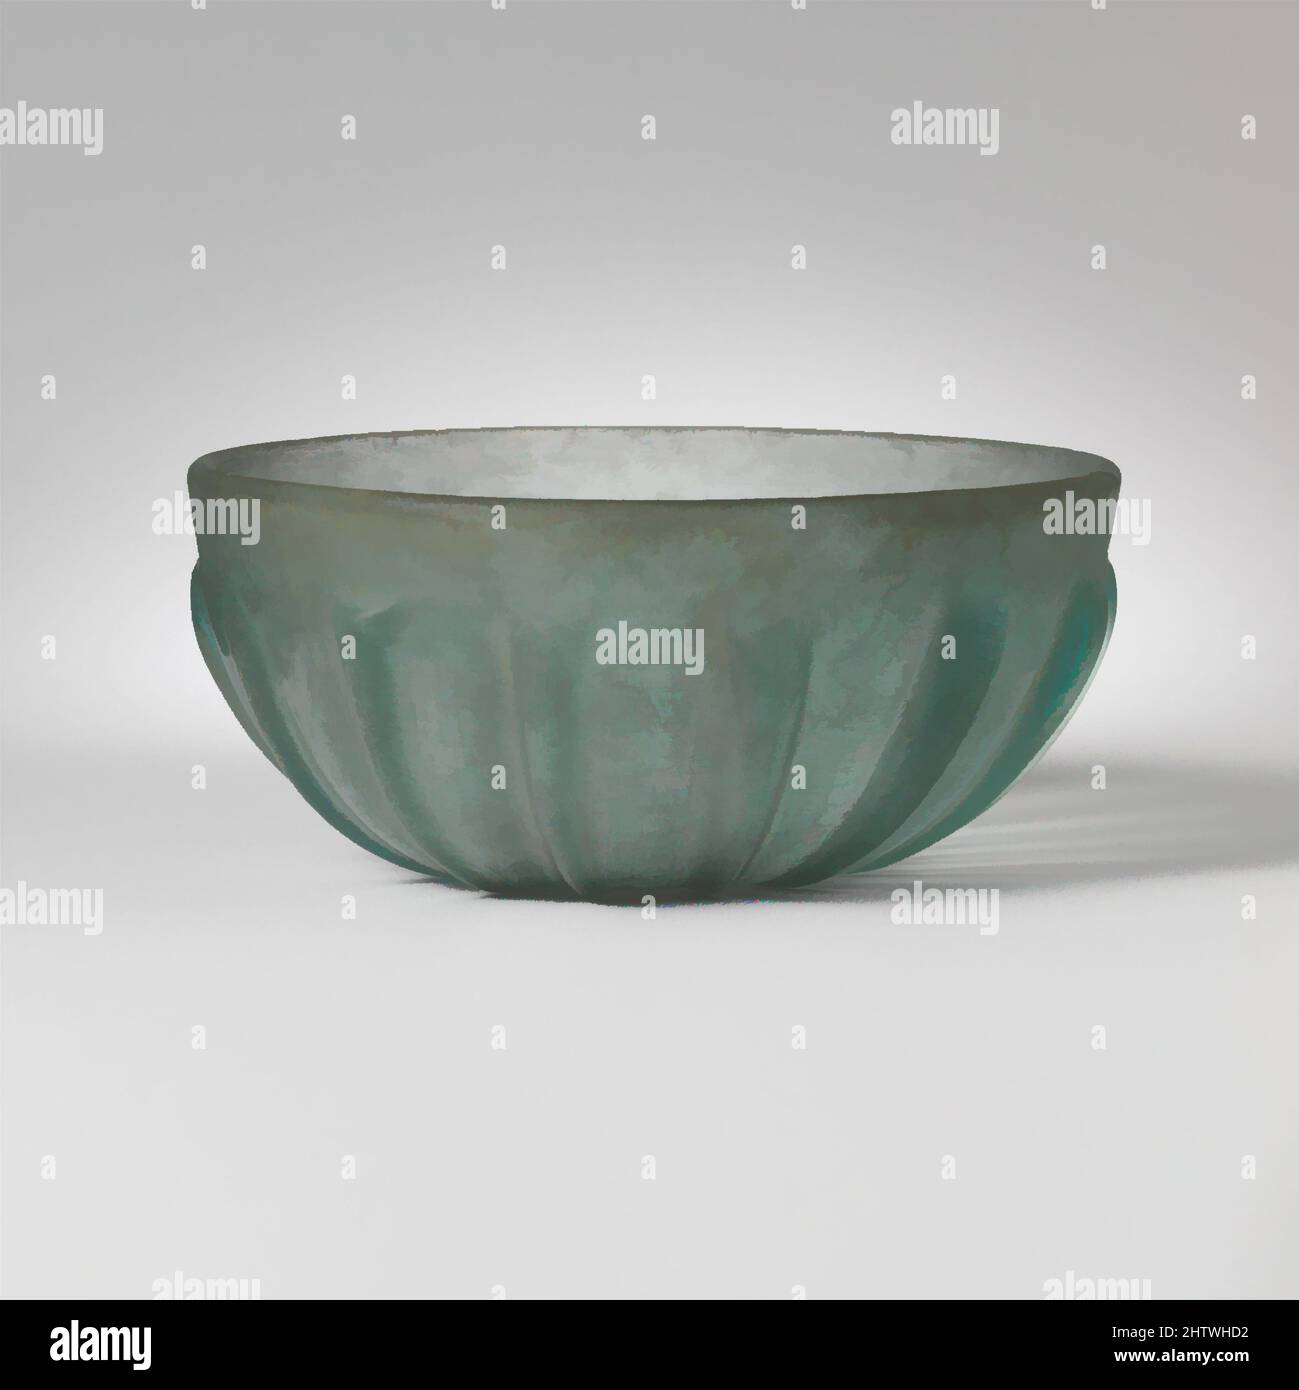 Art inspired by Glass ribbed bowl, Early Imperial, 1st century A.D., Roman, Glass; cast, tooled, and cut, 2 1/16 x 4 9/16in. (5.2 x 11.6cm), Glass, Translucent blue green. Plain rounded rim; sides curving in to slightly concave bottom. On exterior, fifteen prominent, almost vertical, Classic works modernized by Artotop with a splash of modernity. Shapes, color and value, eye-catching visual impact on art. Emotions through freedom of artworks in a contemporary way. A timeless message pursuing a wildly creative new direction. Artists turning to the digital medium and creating the Artotop NFT Stock Photo